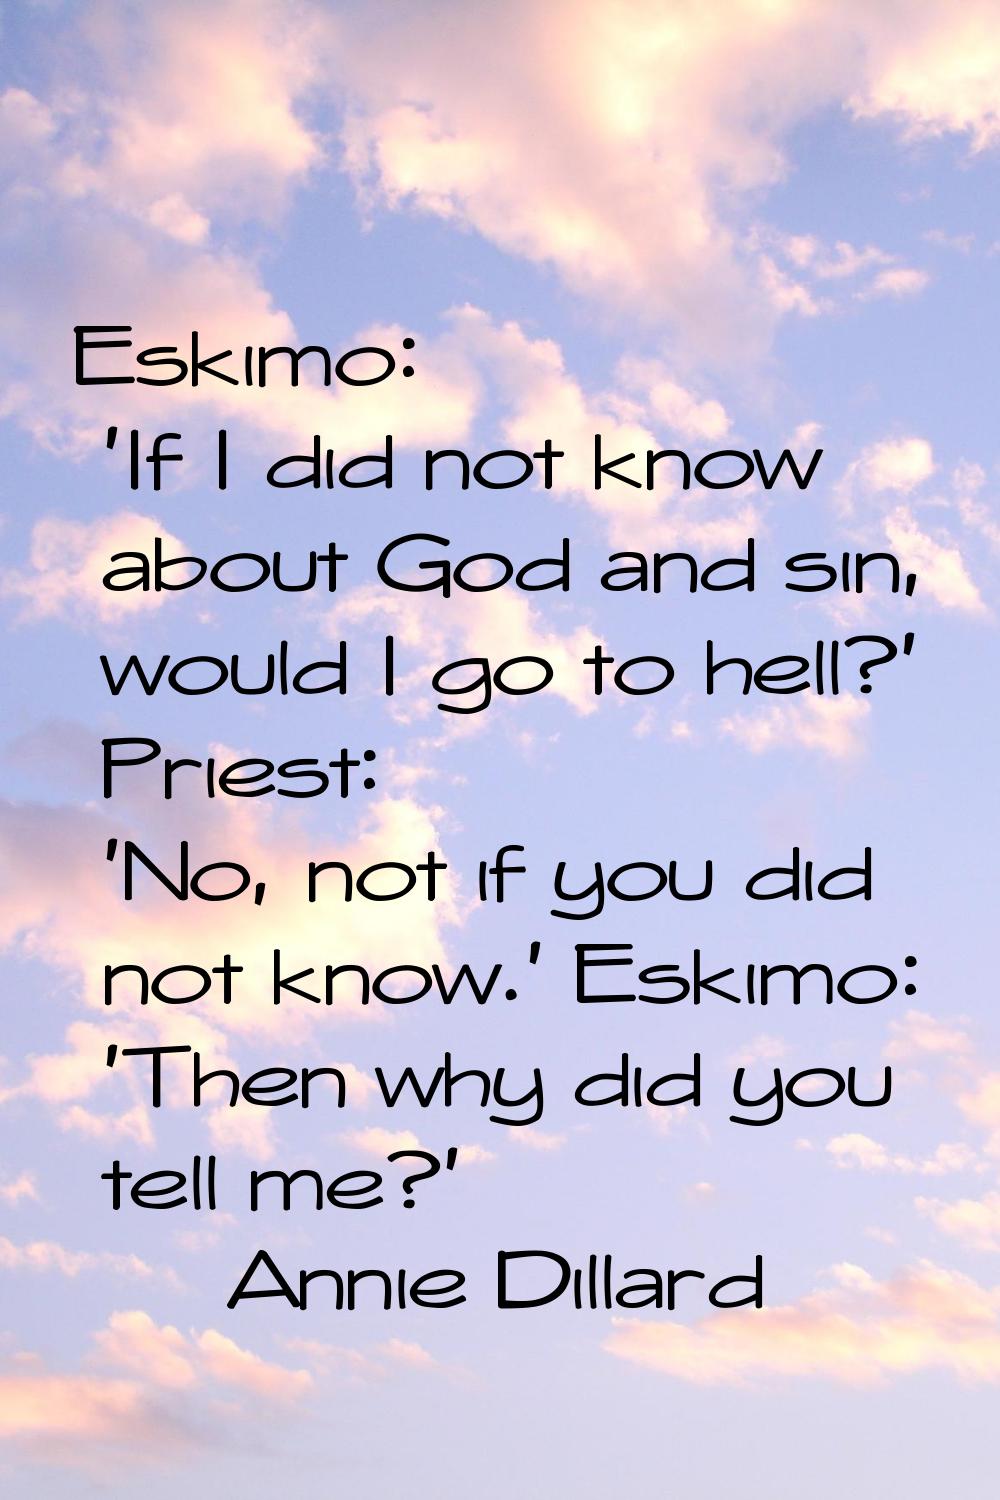 Eskimo: 'If I did not know about God and sin, would I go to hell?' Priest: 'No, not if you did not 